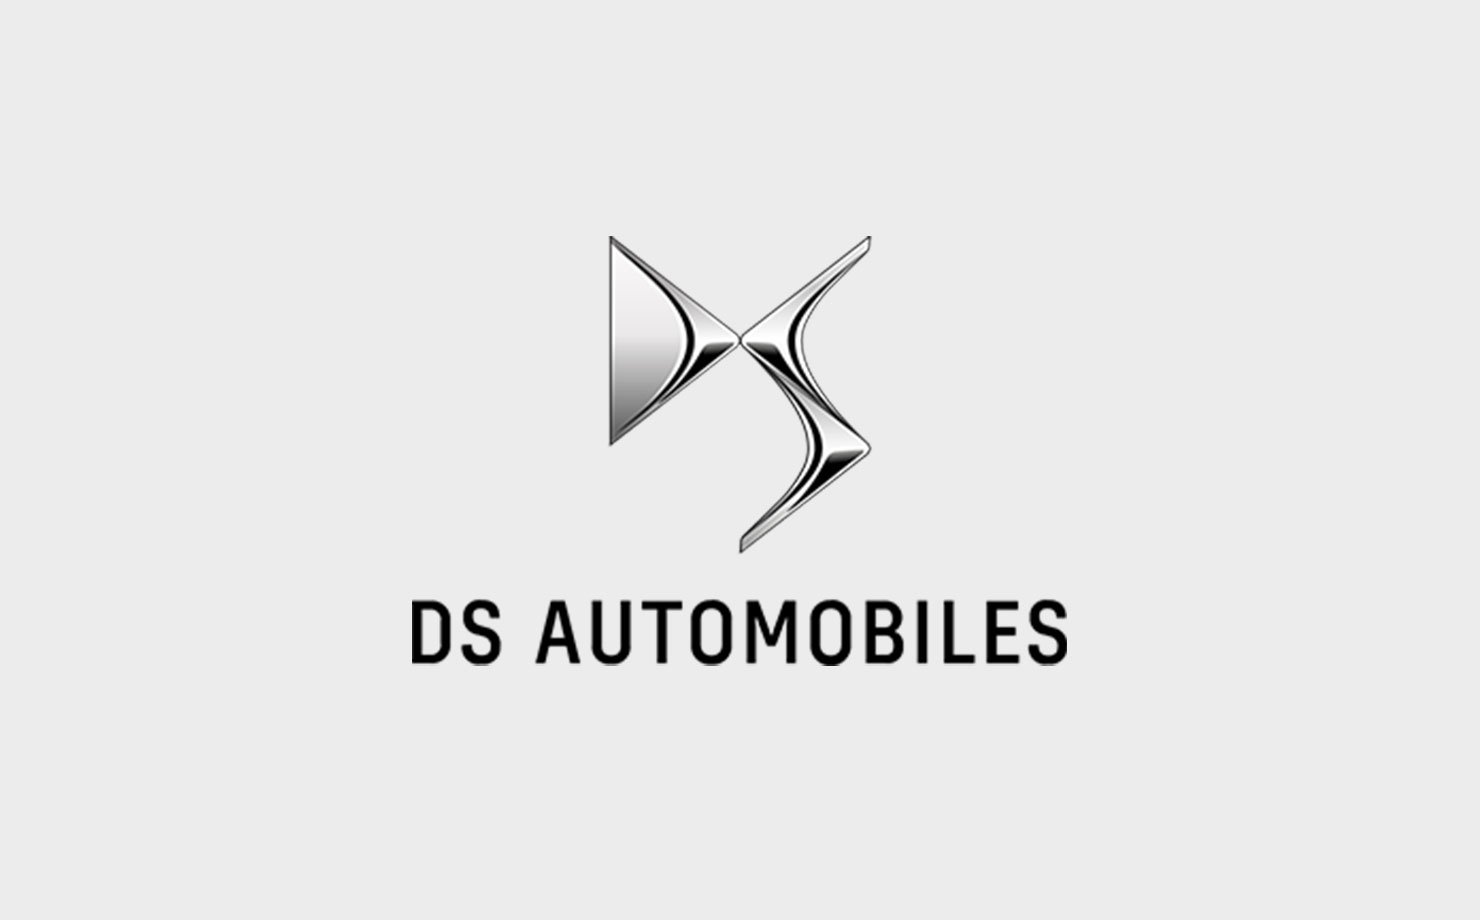 Image of DS Automobiles logo